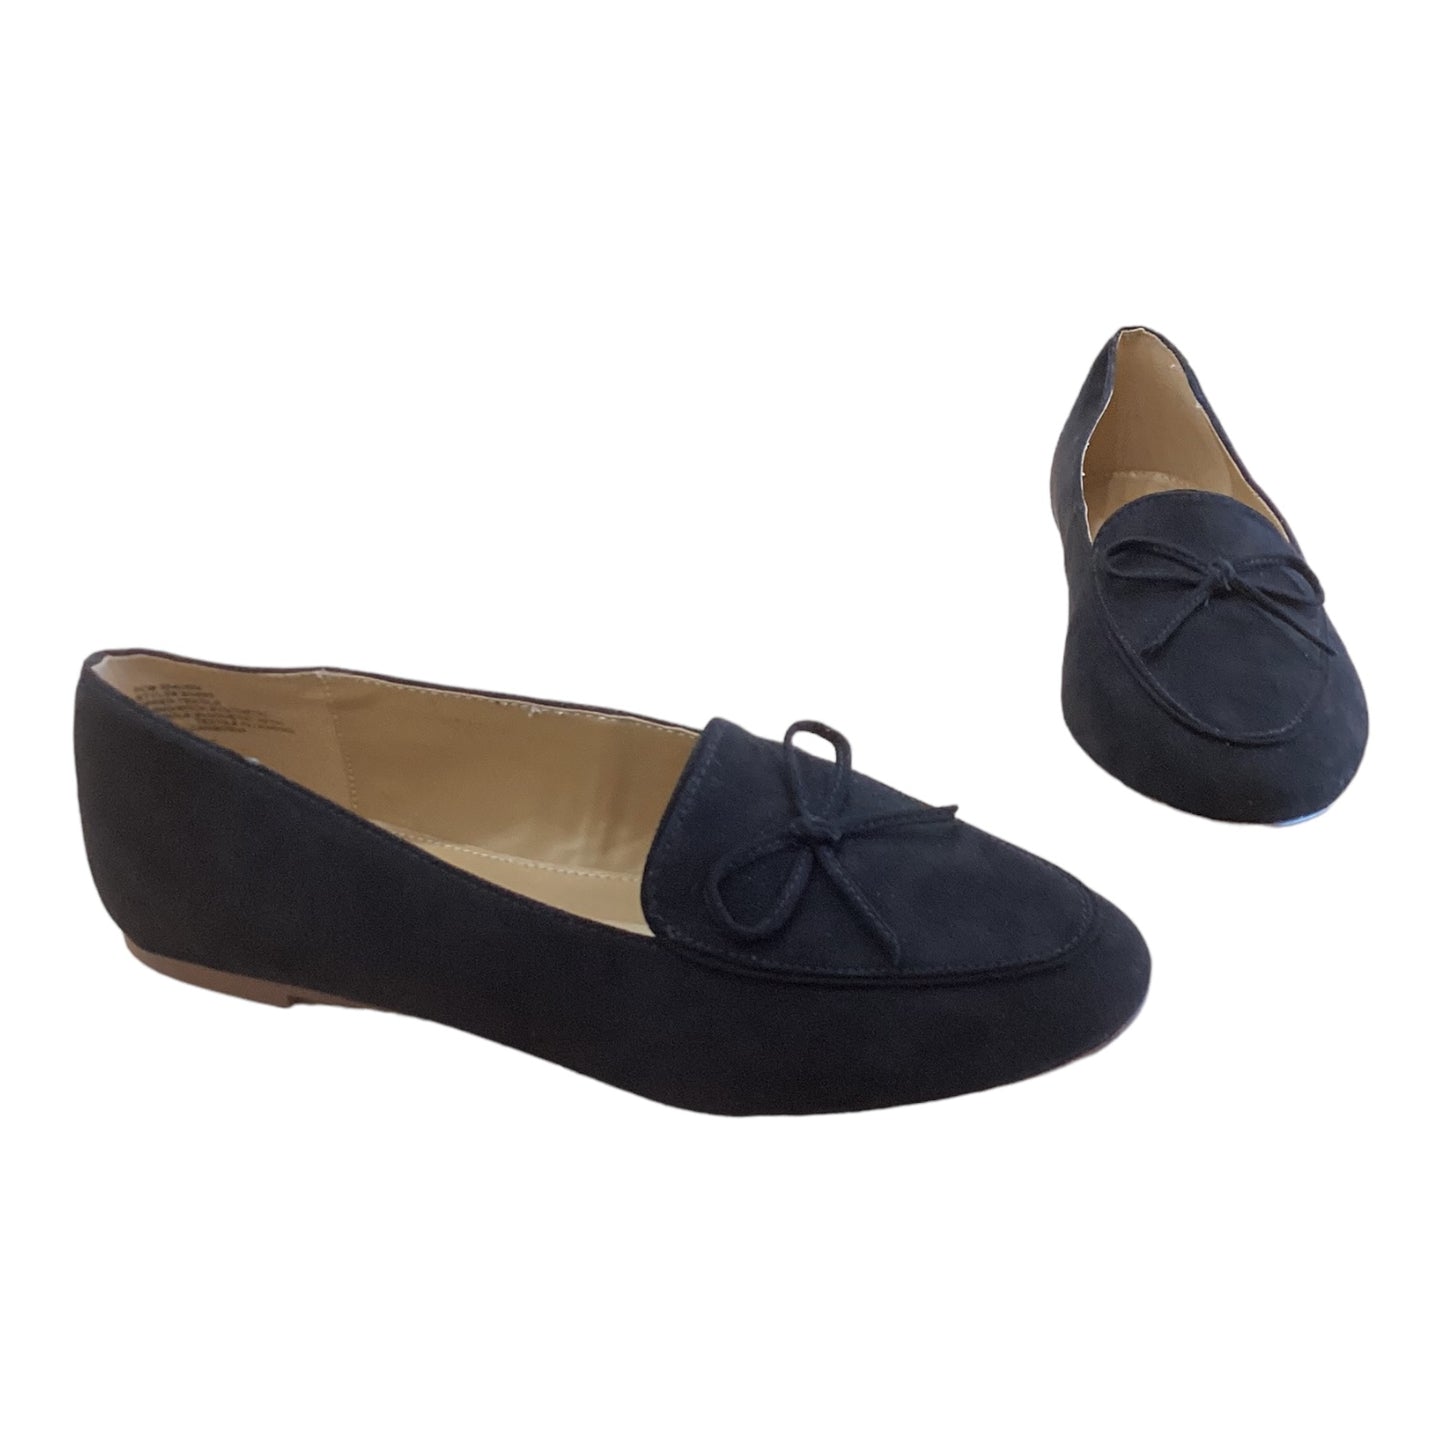 Shoes Flats By J. Crew  Size: 7